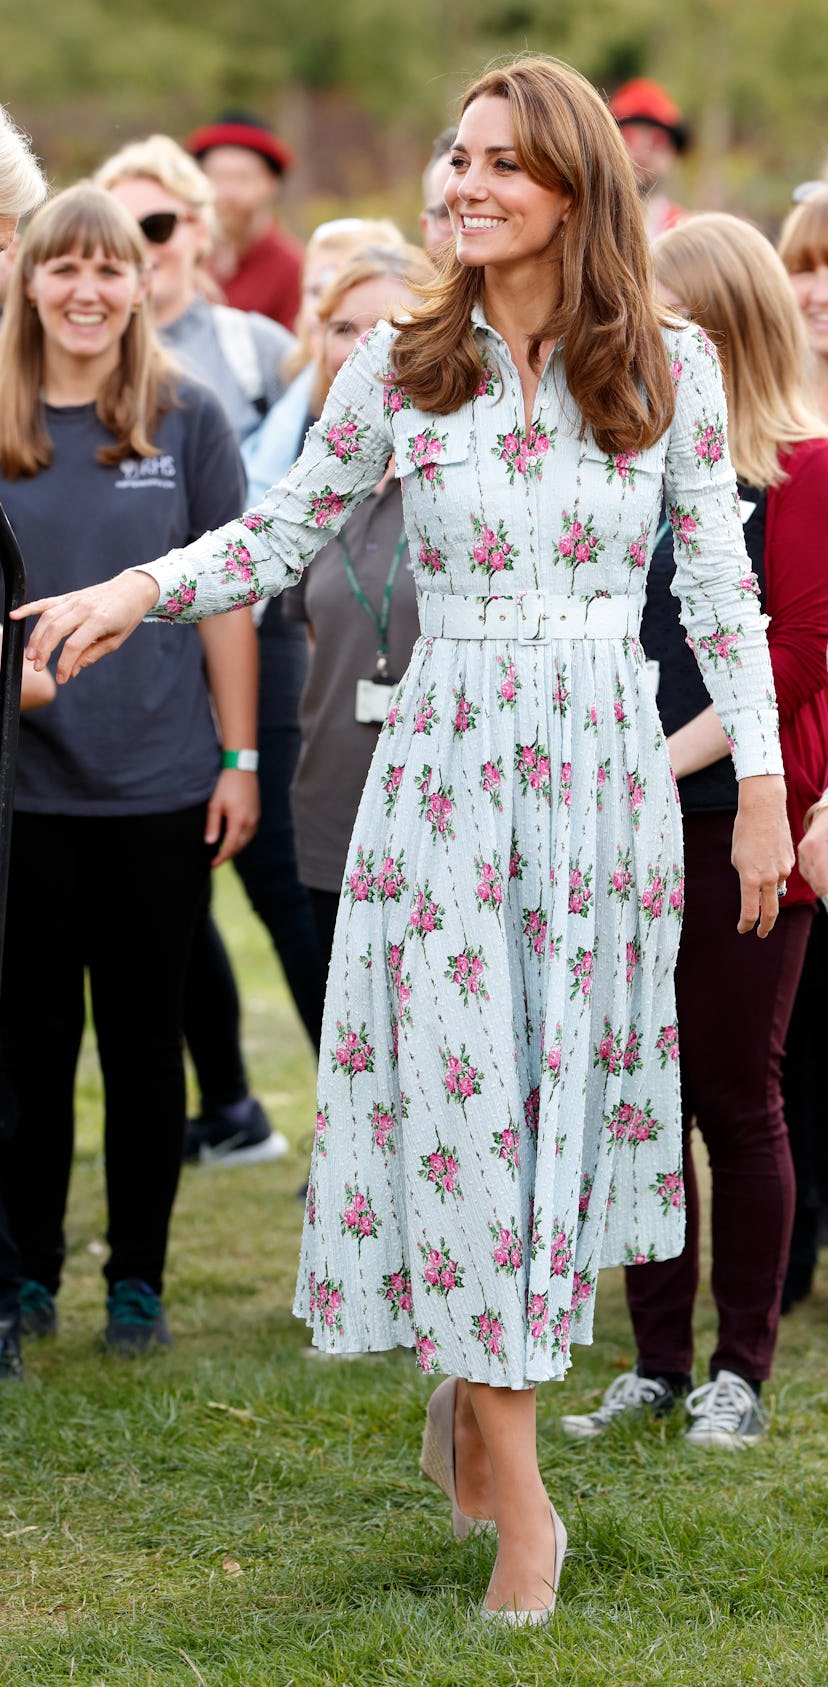 Kate Middleton also wears floral